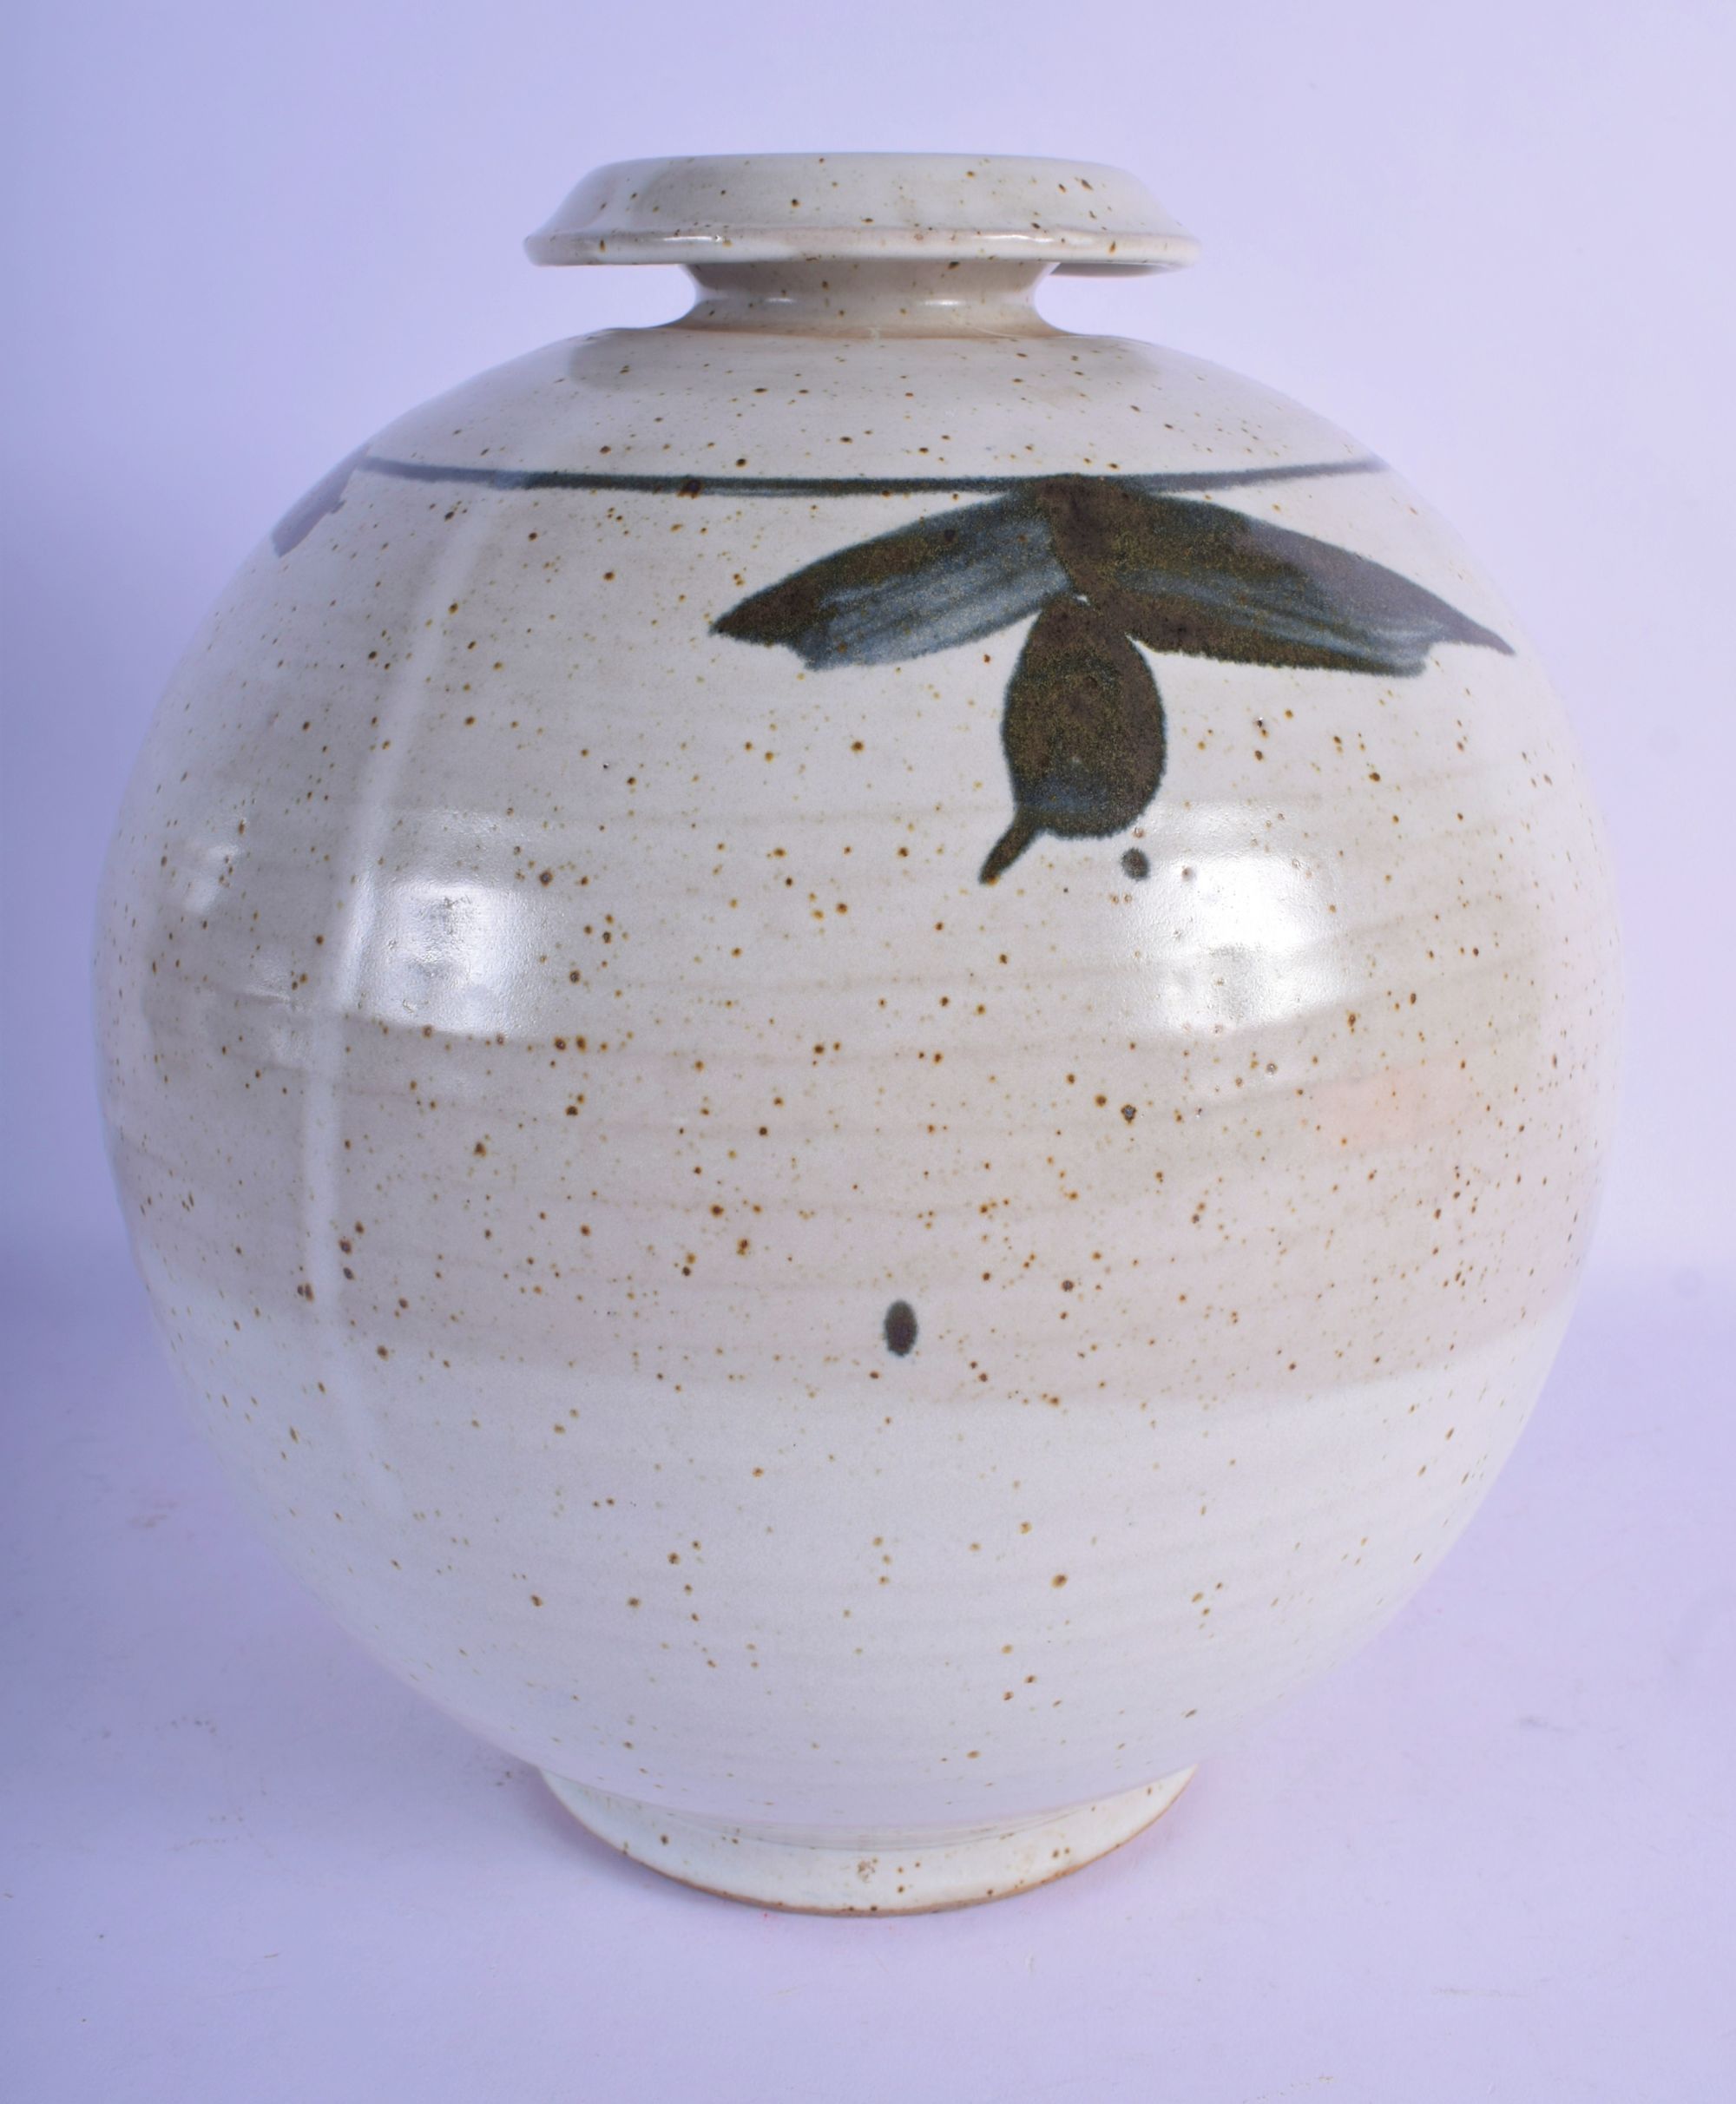 A LARGE STUDIO POTTERY STONEWARE VASE painted with sprays. 26 cm x 18 cm. - Image 2 of 5